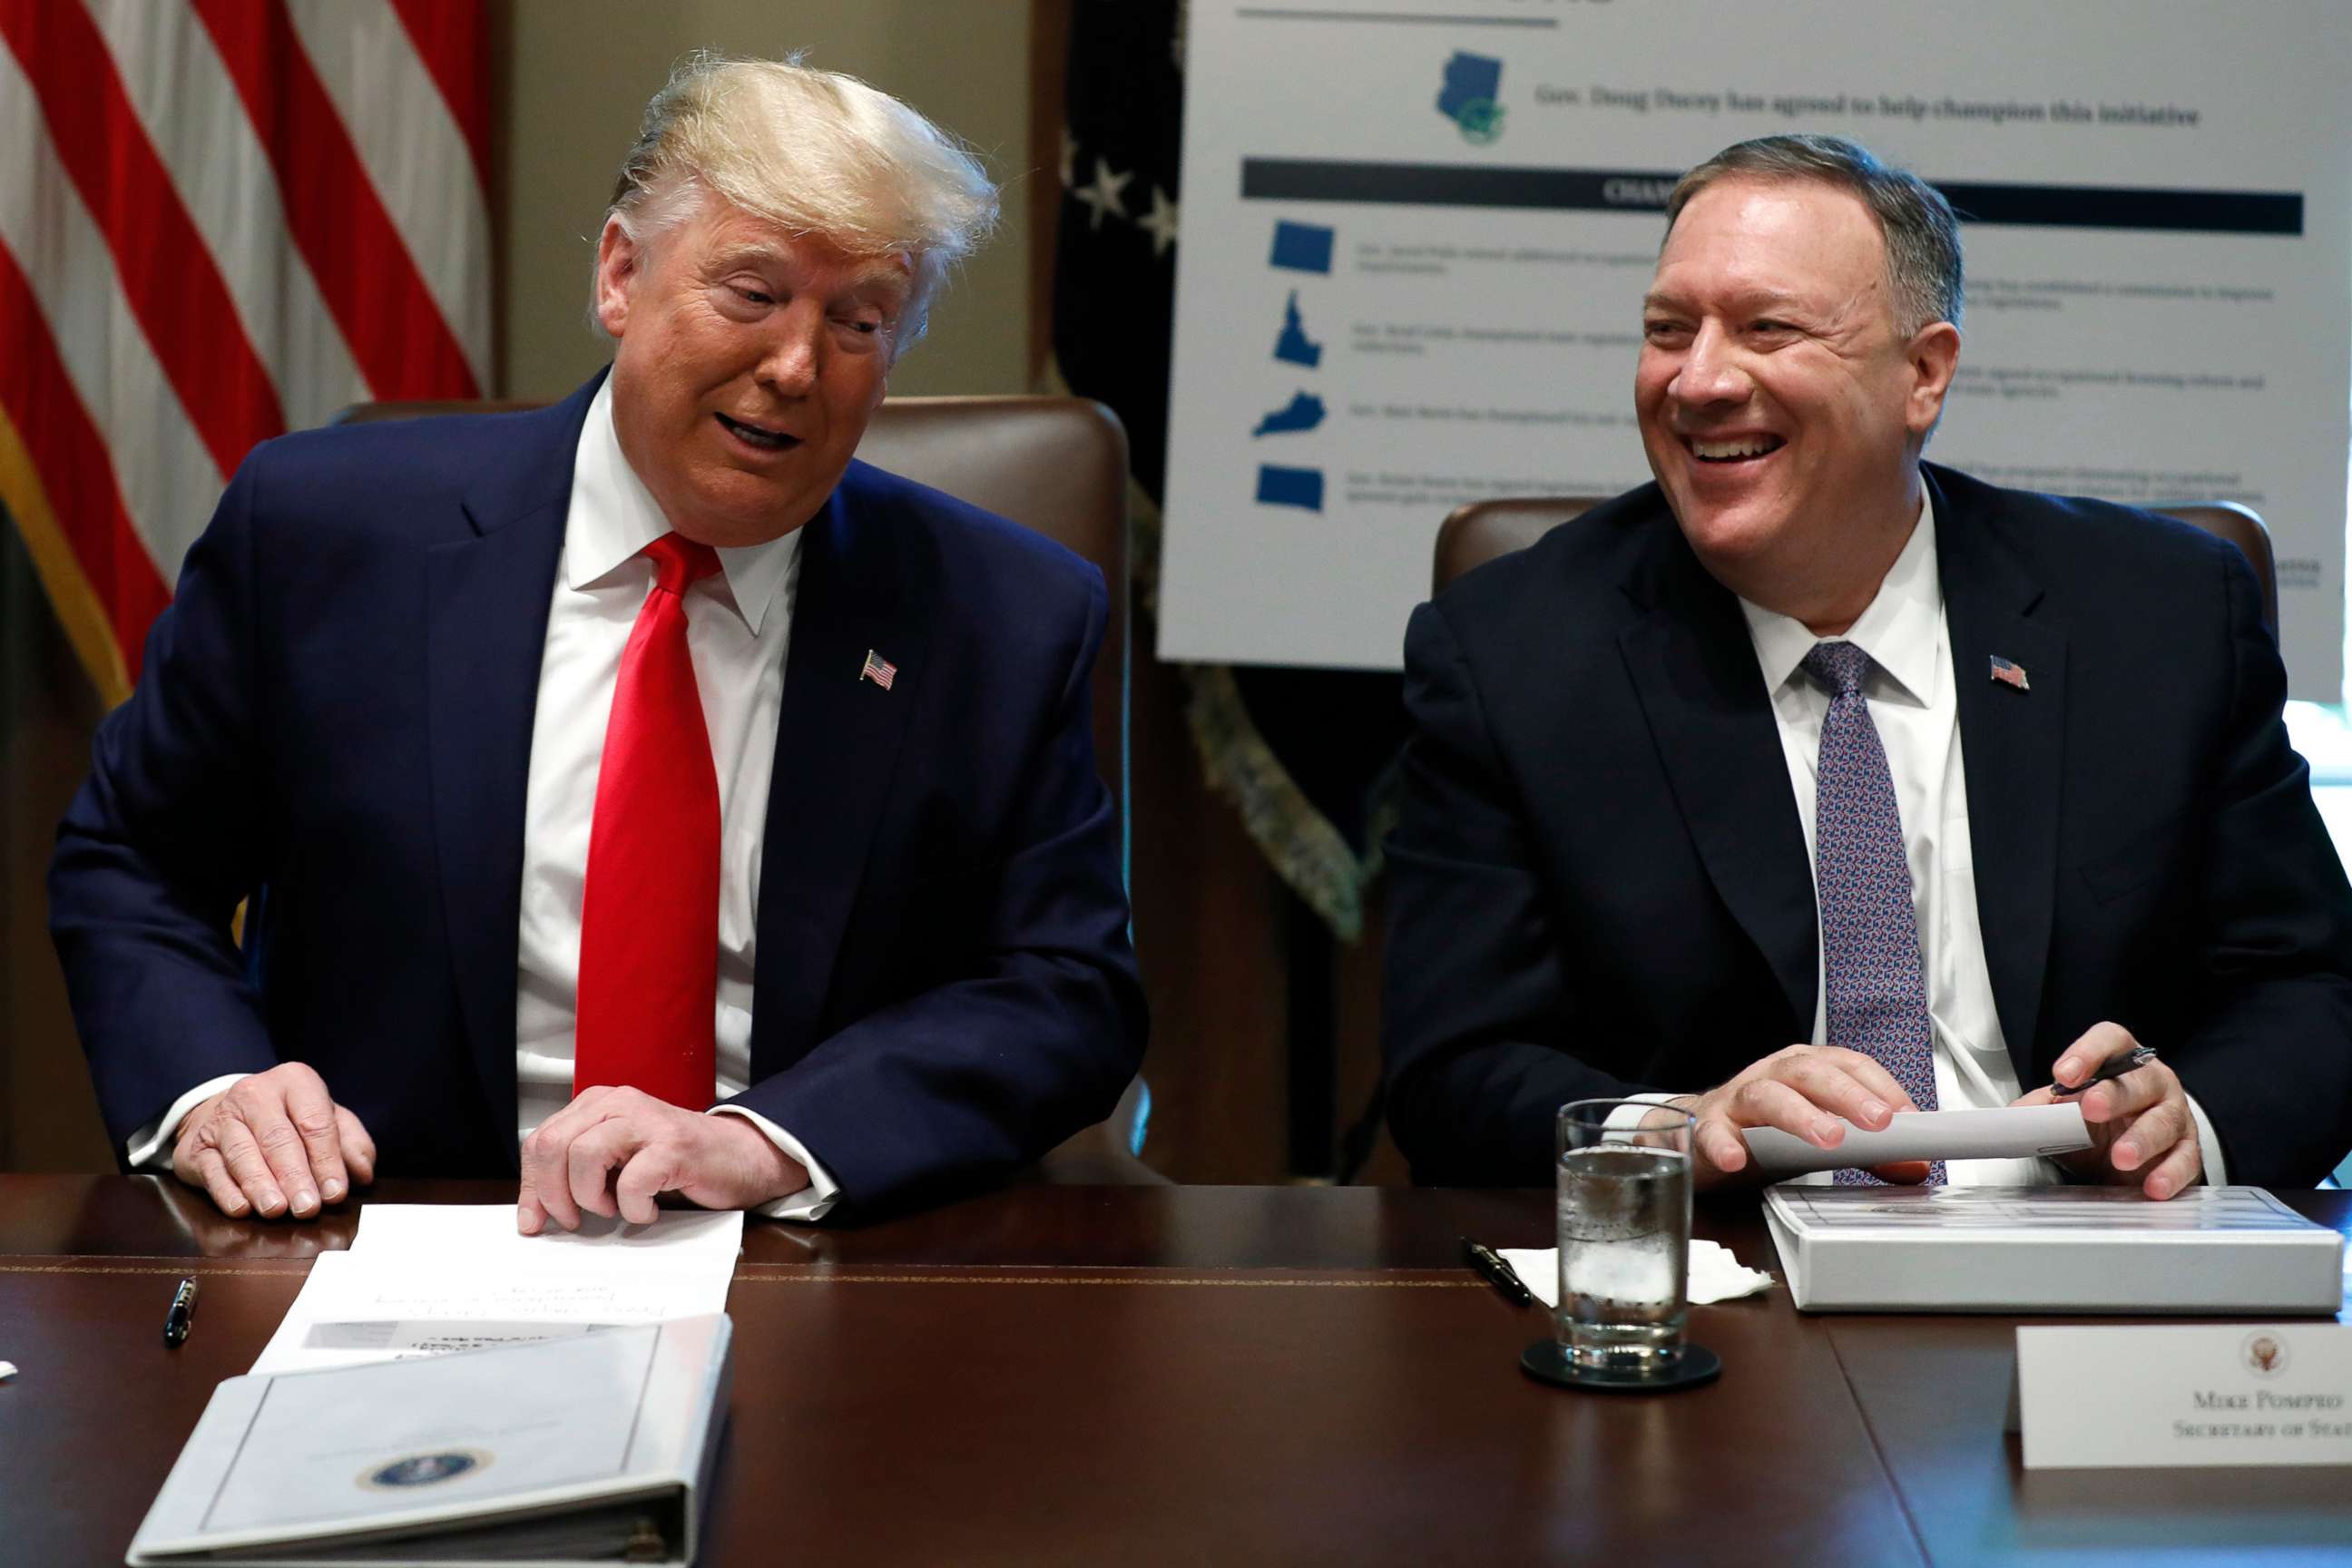 PHOTO: President Donald Trump and Secretary of State Mike Pompeo laugh during a Cabinet Meeting at the White House, Oct. 21, 2019.